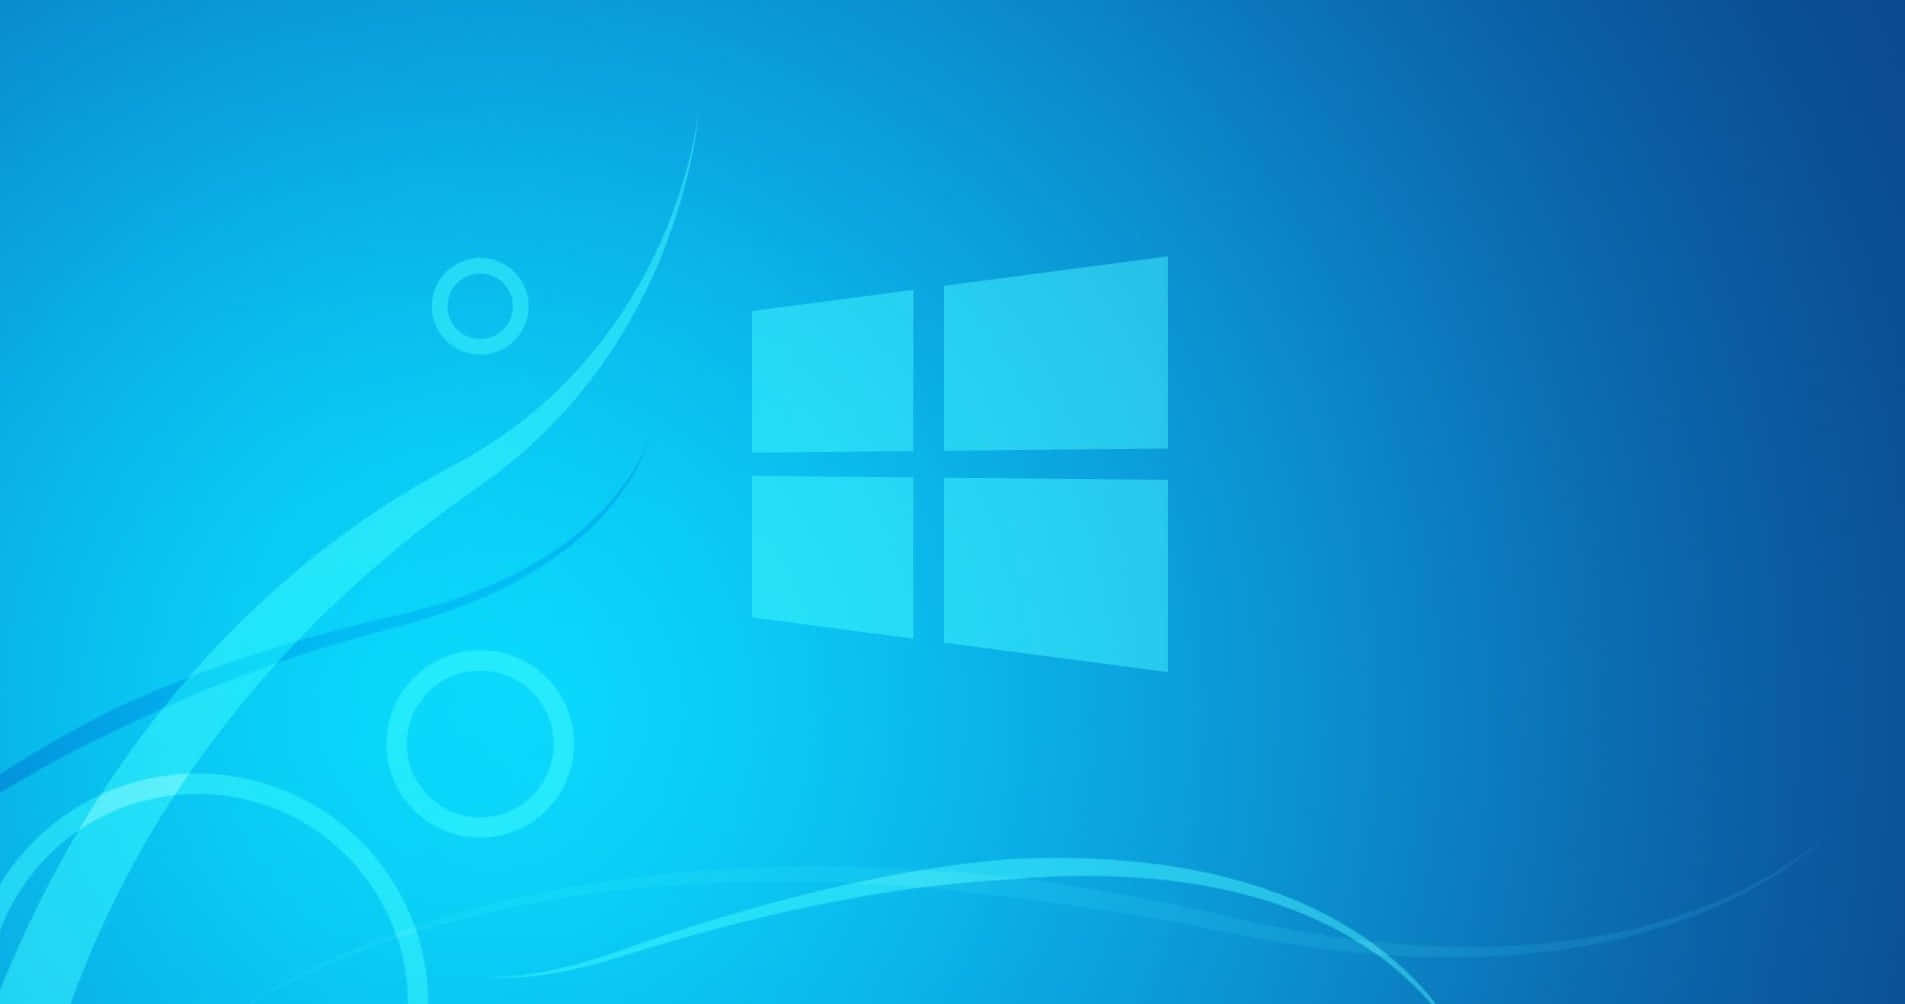 Windows 8 Official Background